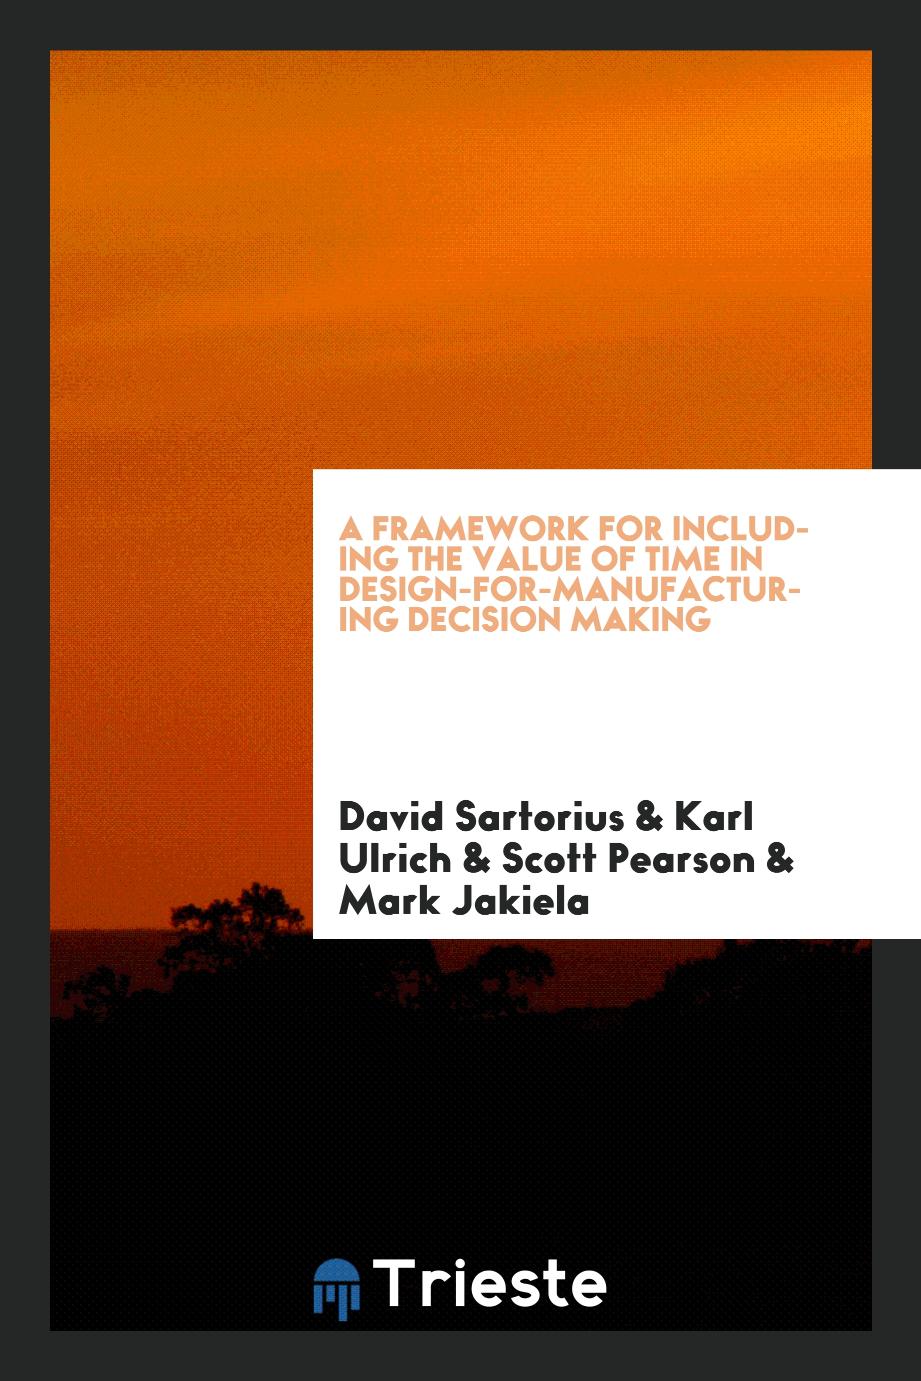 David Sartorius, Karl Ulrich, Scott Pearson, Mark Jakiela - A framework for including the value of time in design-for-manufacturing decision making